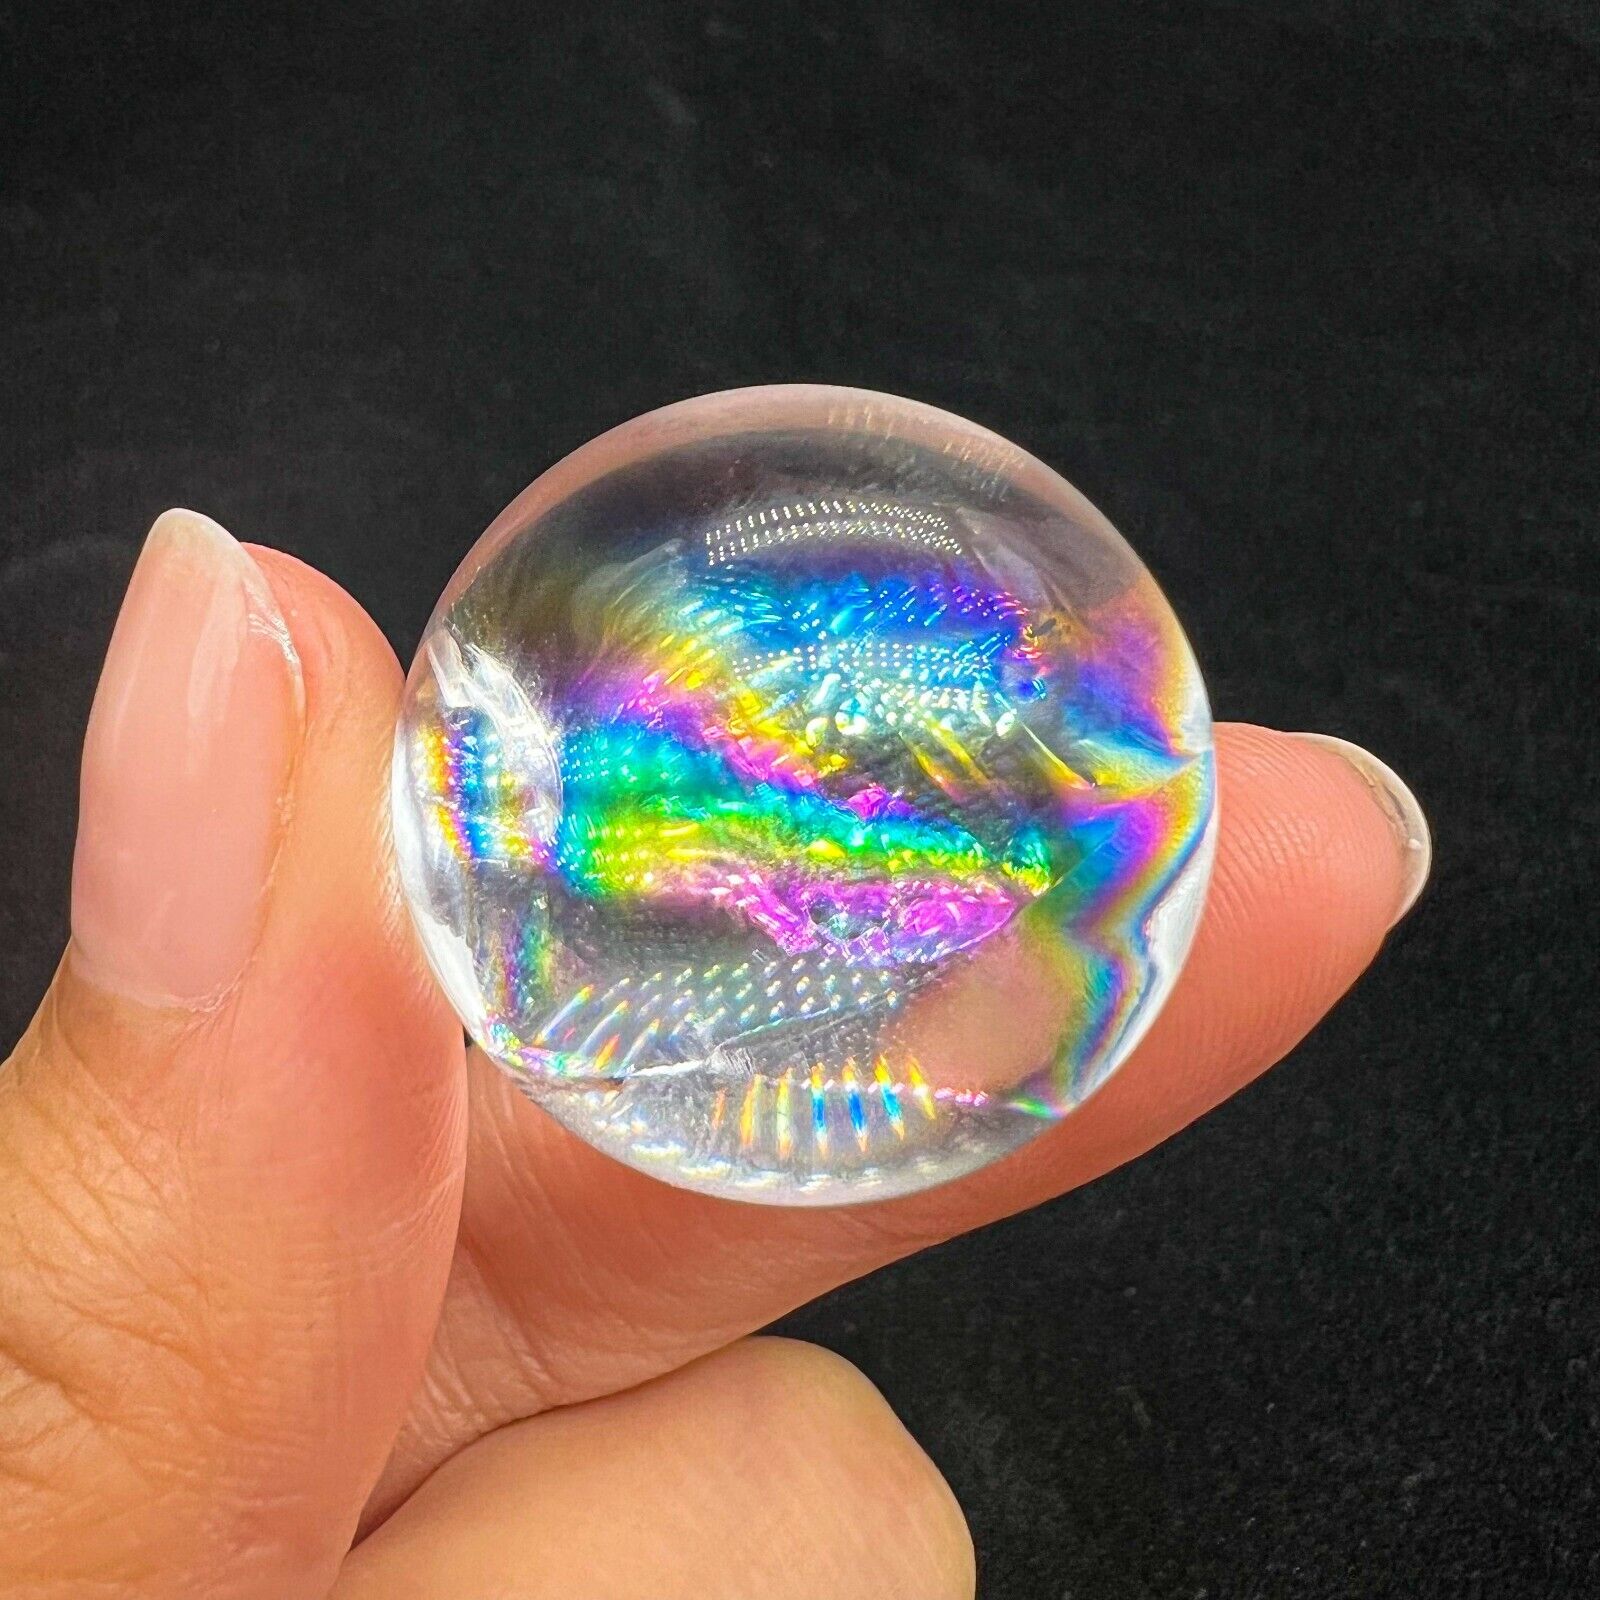 25mm 23g Natural Clear Quartz Sphere Double Sided Rainbow Crystal Ball Healing 6